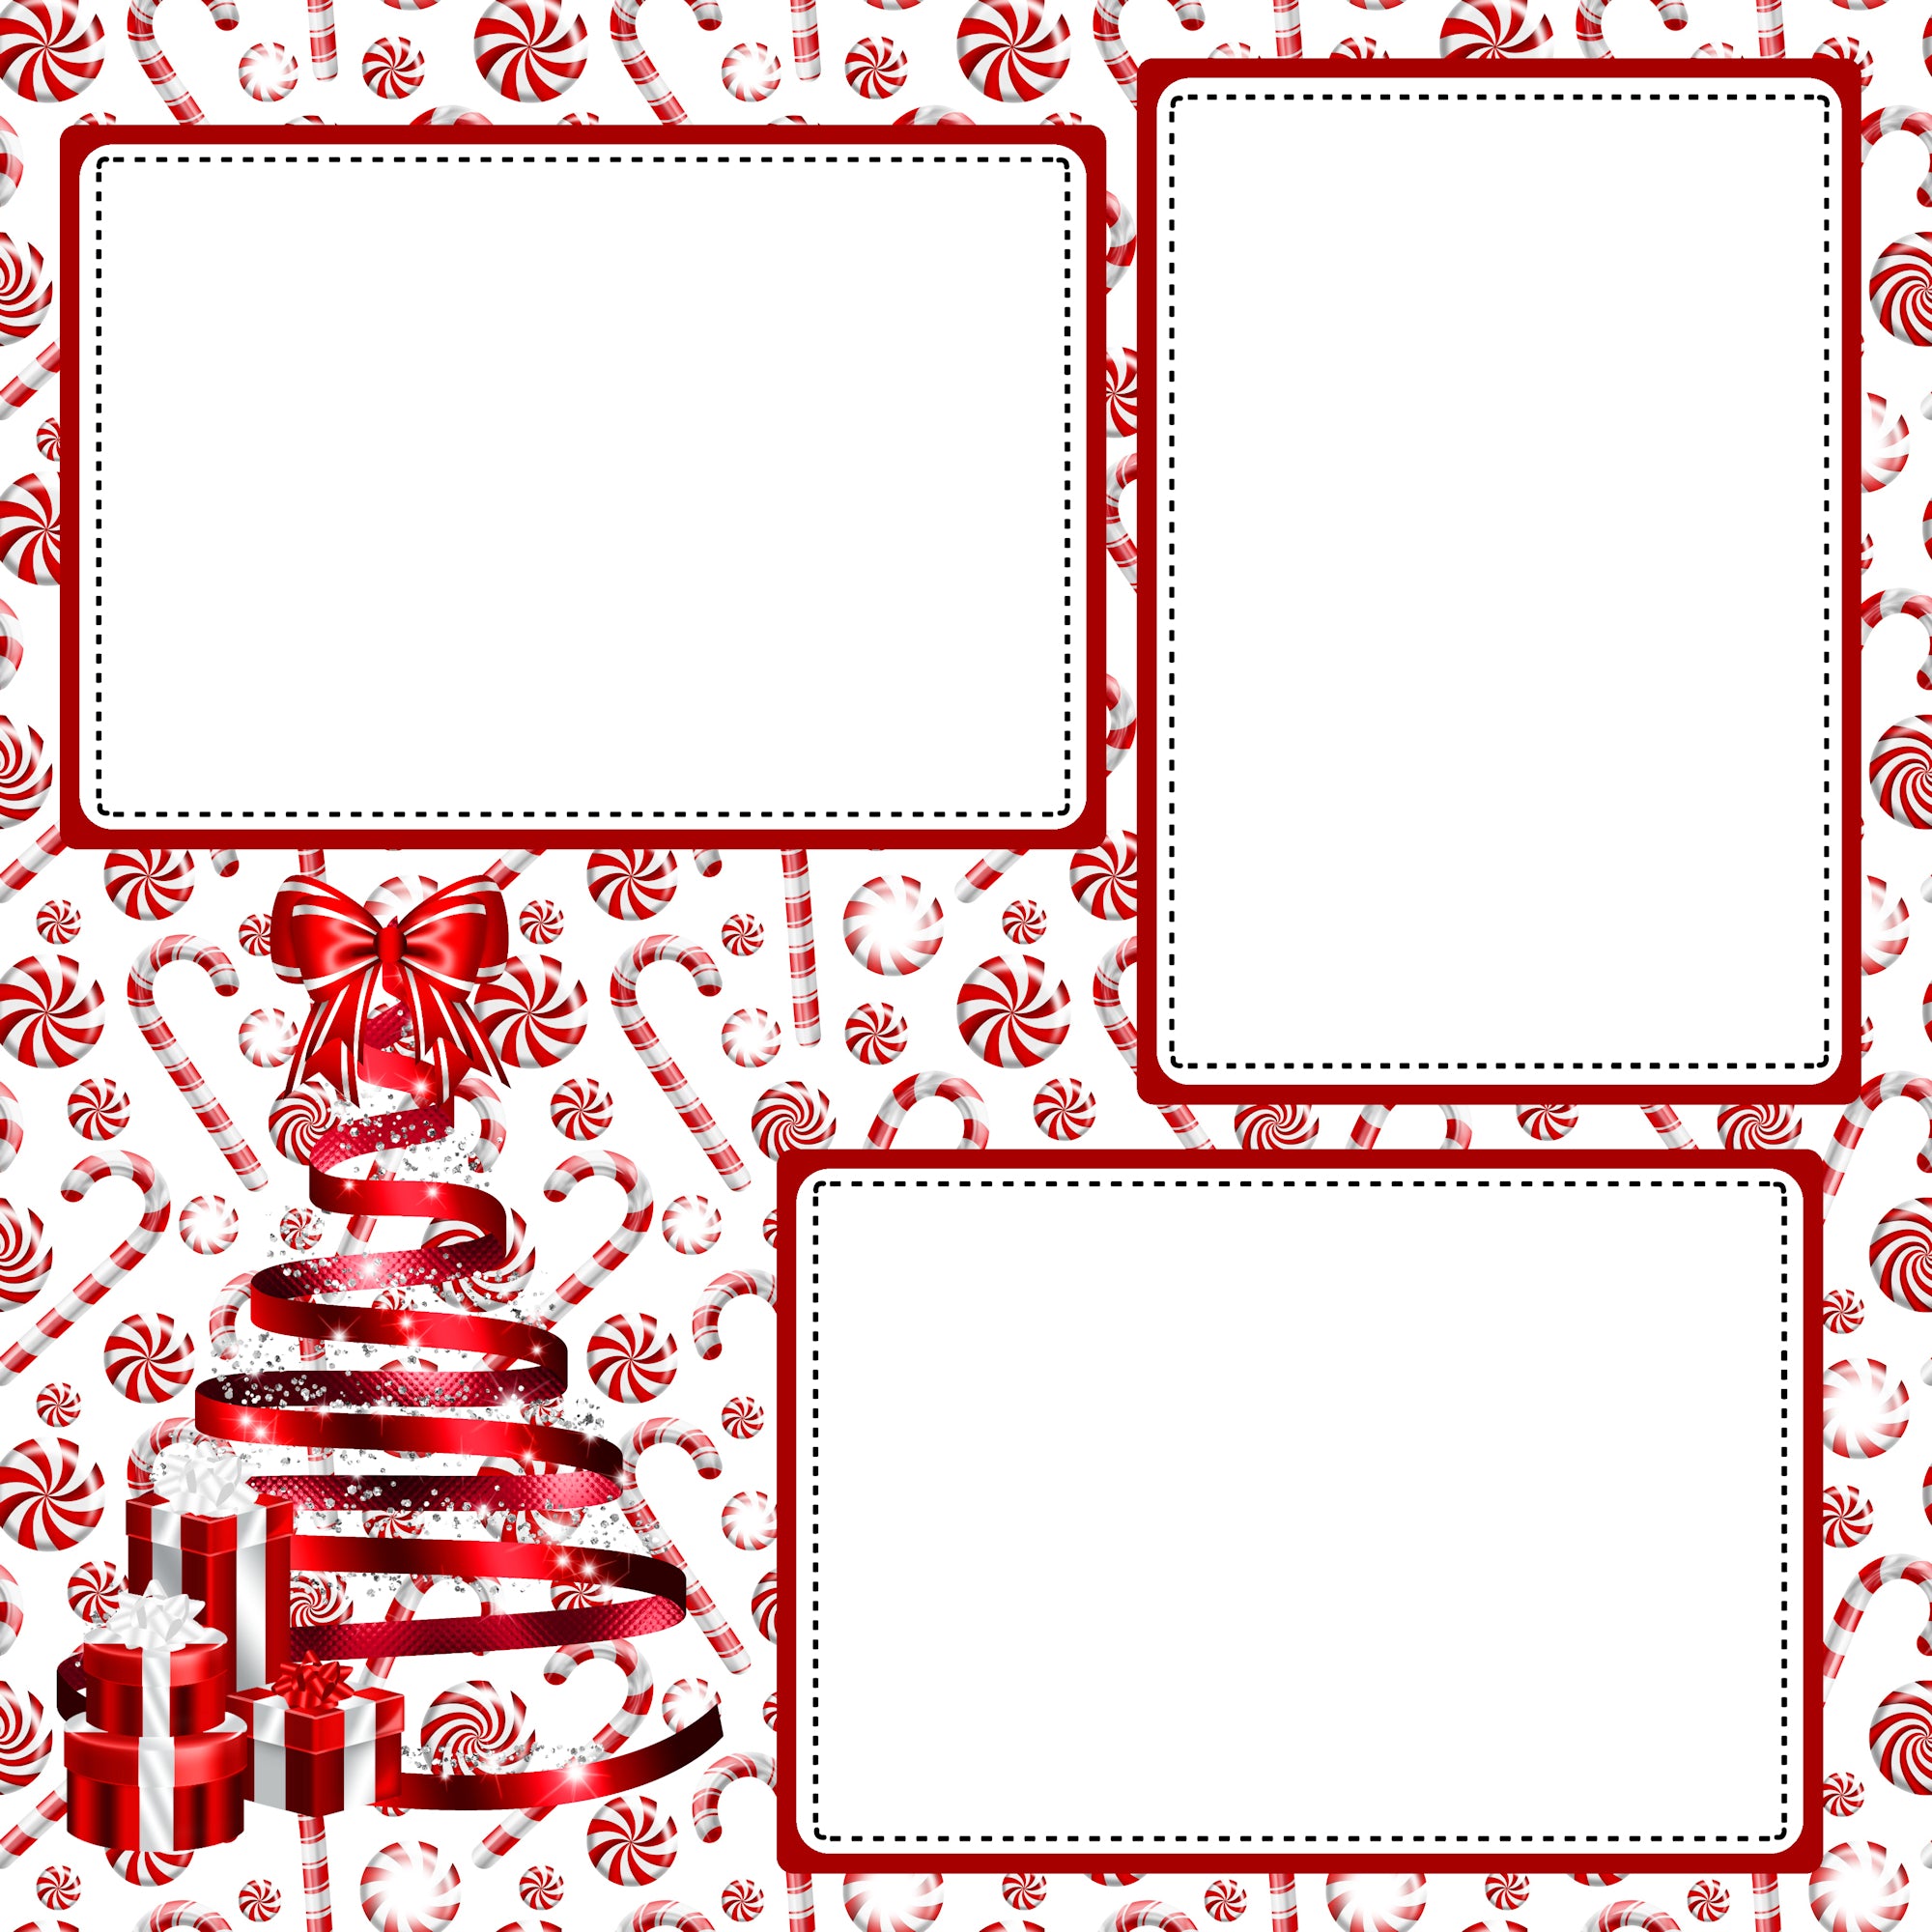 Peppermint Christmas 2023 (2) - 12 x 12 Premade, Printed Scrapbook Pages by SSC Designs